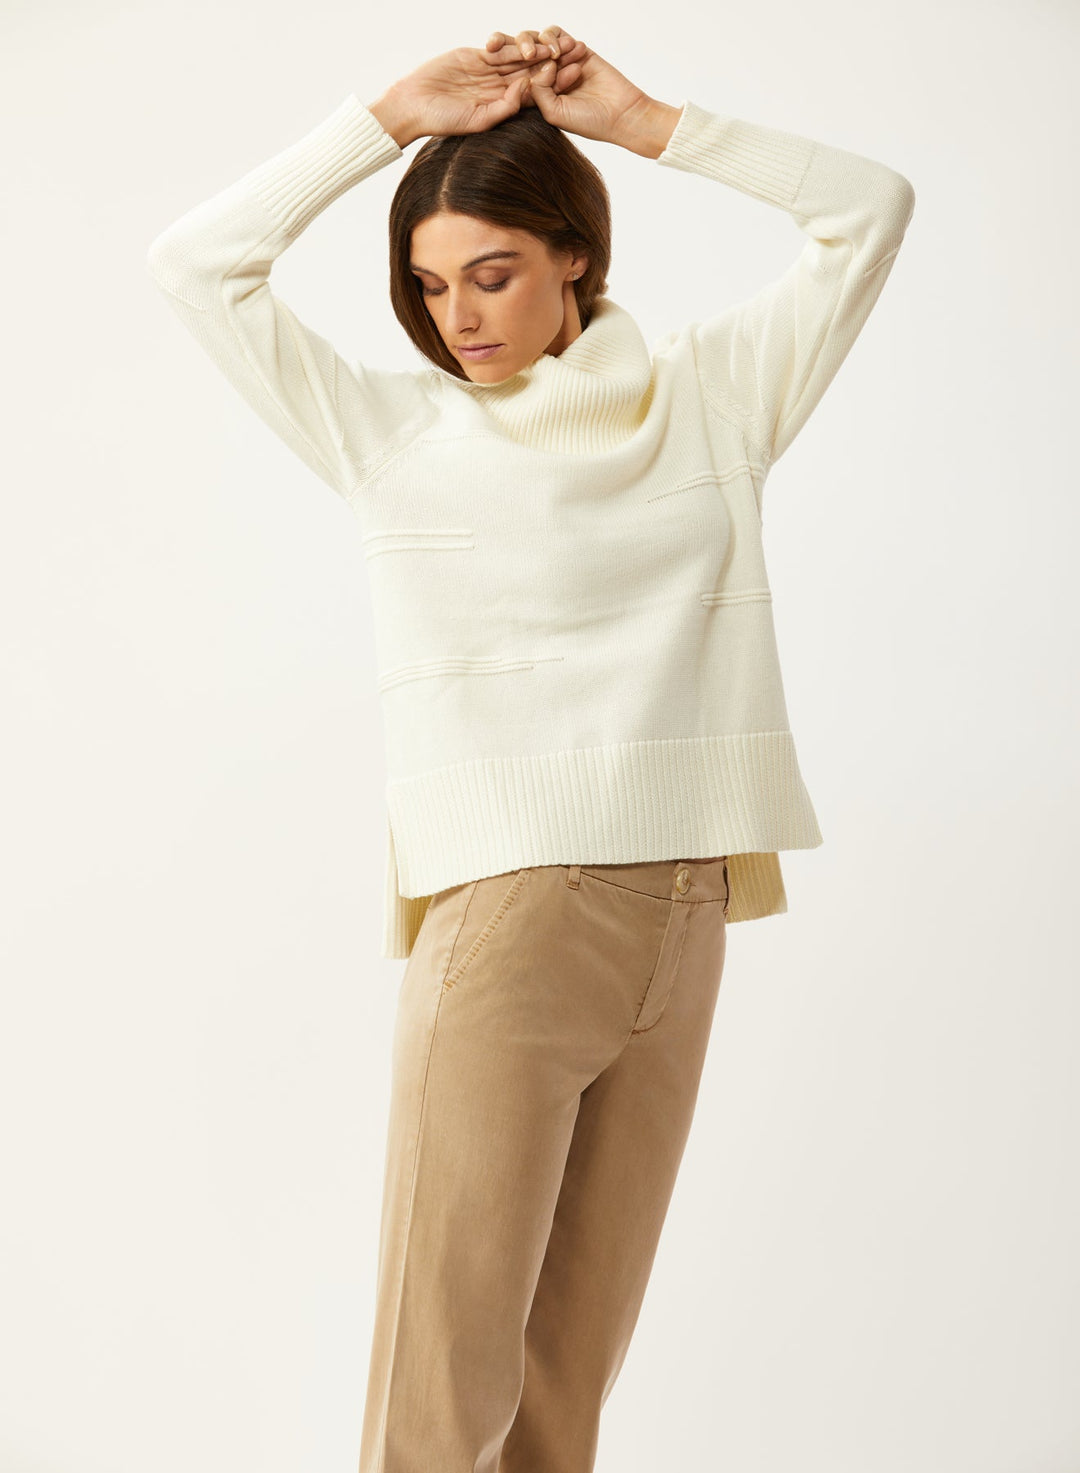 Ecru - Cowl Neck Sweater with Raised Stitch: Ivory - Shorely Chic Boutique